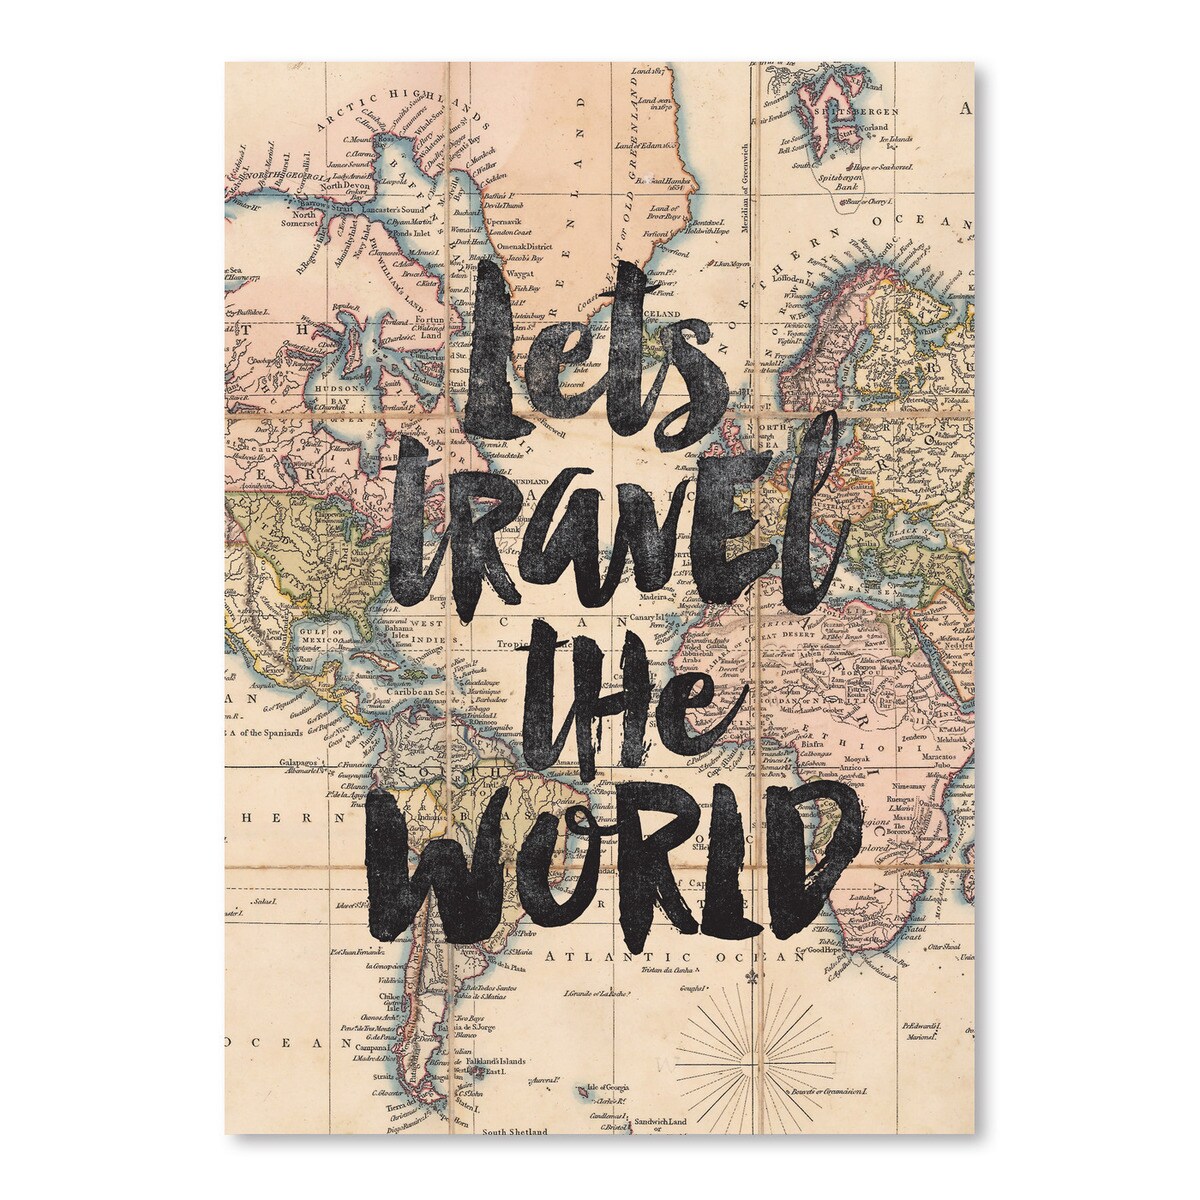 Lets Travel The World Bw by Motivated Type  Poster Art Print - Americanflat